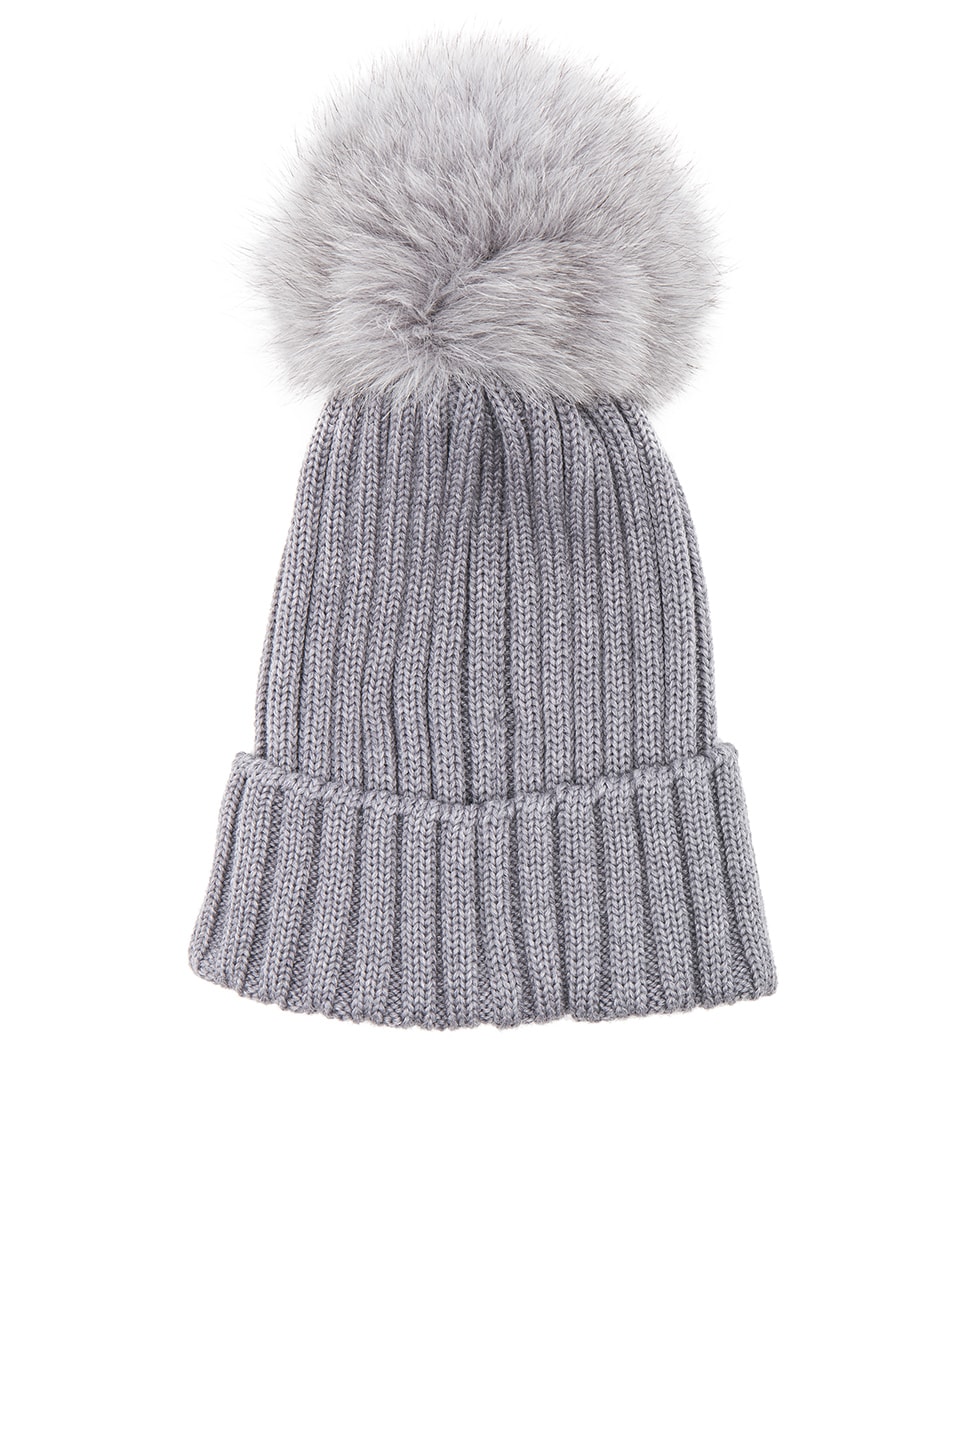 MONCLER Berretto Beanie With Fox Fur Pom In Gray. in Charcoal | ModeSens